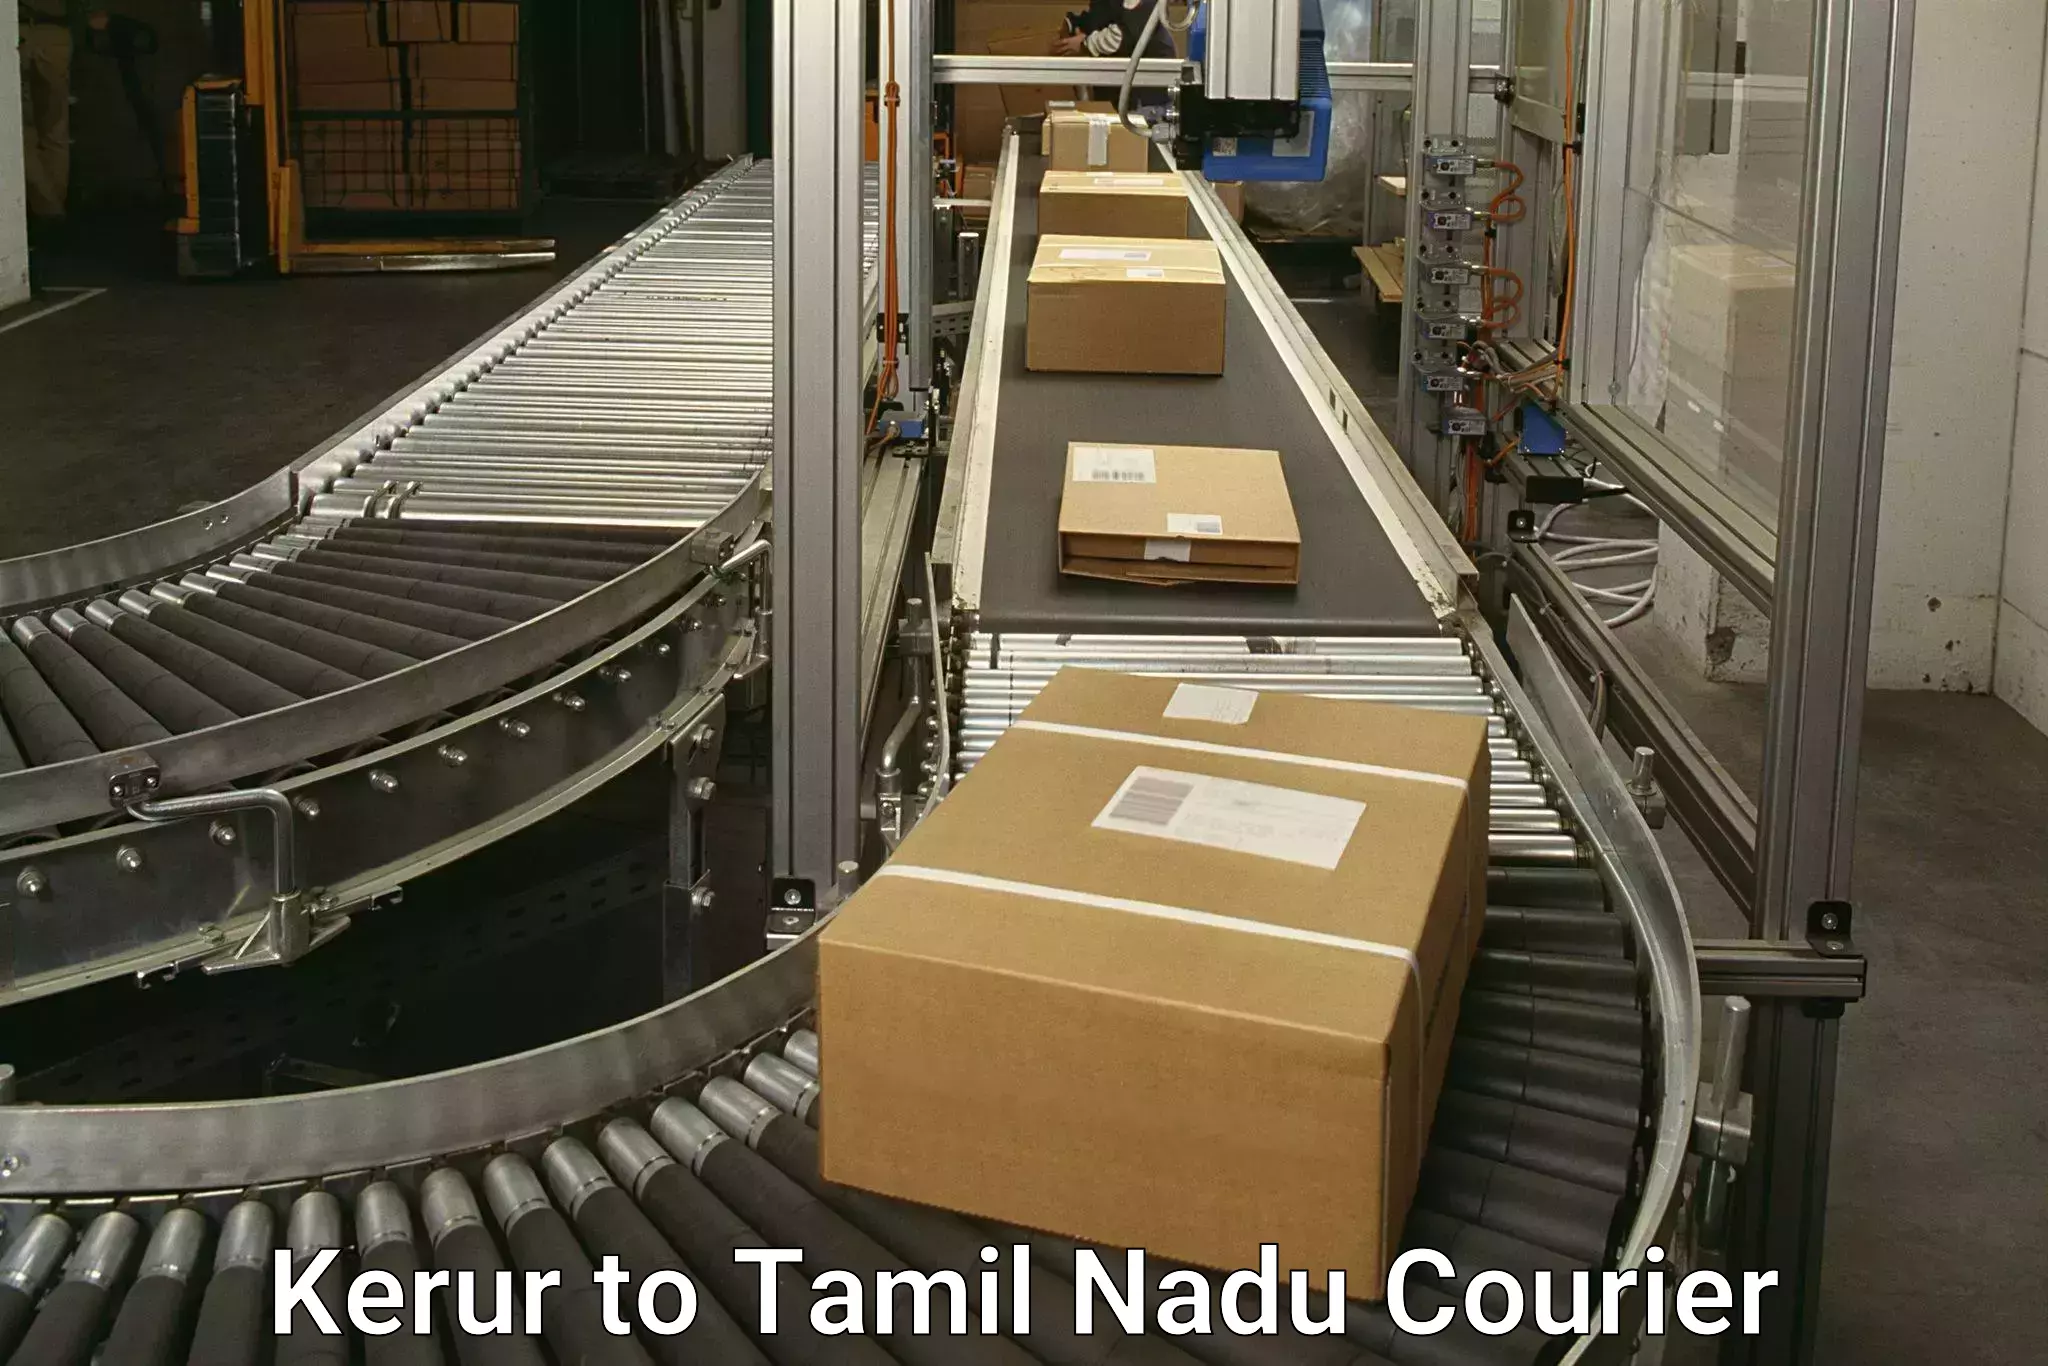 Expedited parcel delivery Kerur to Vellore